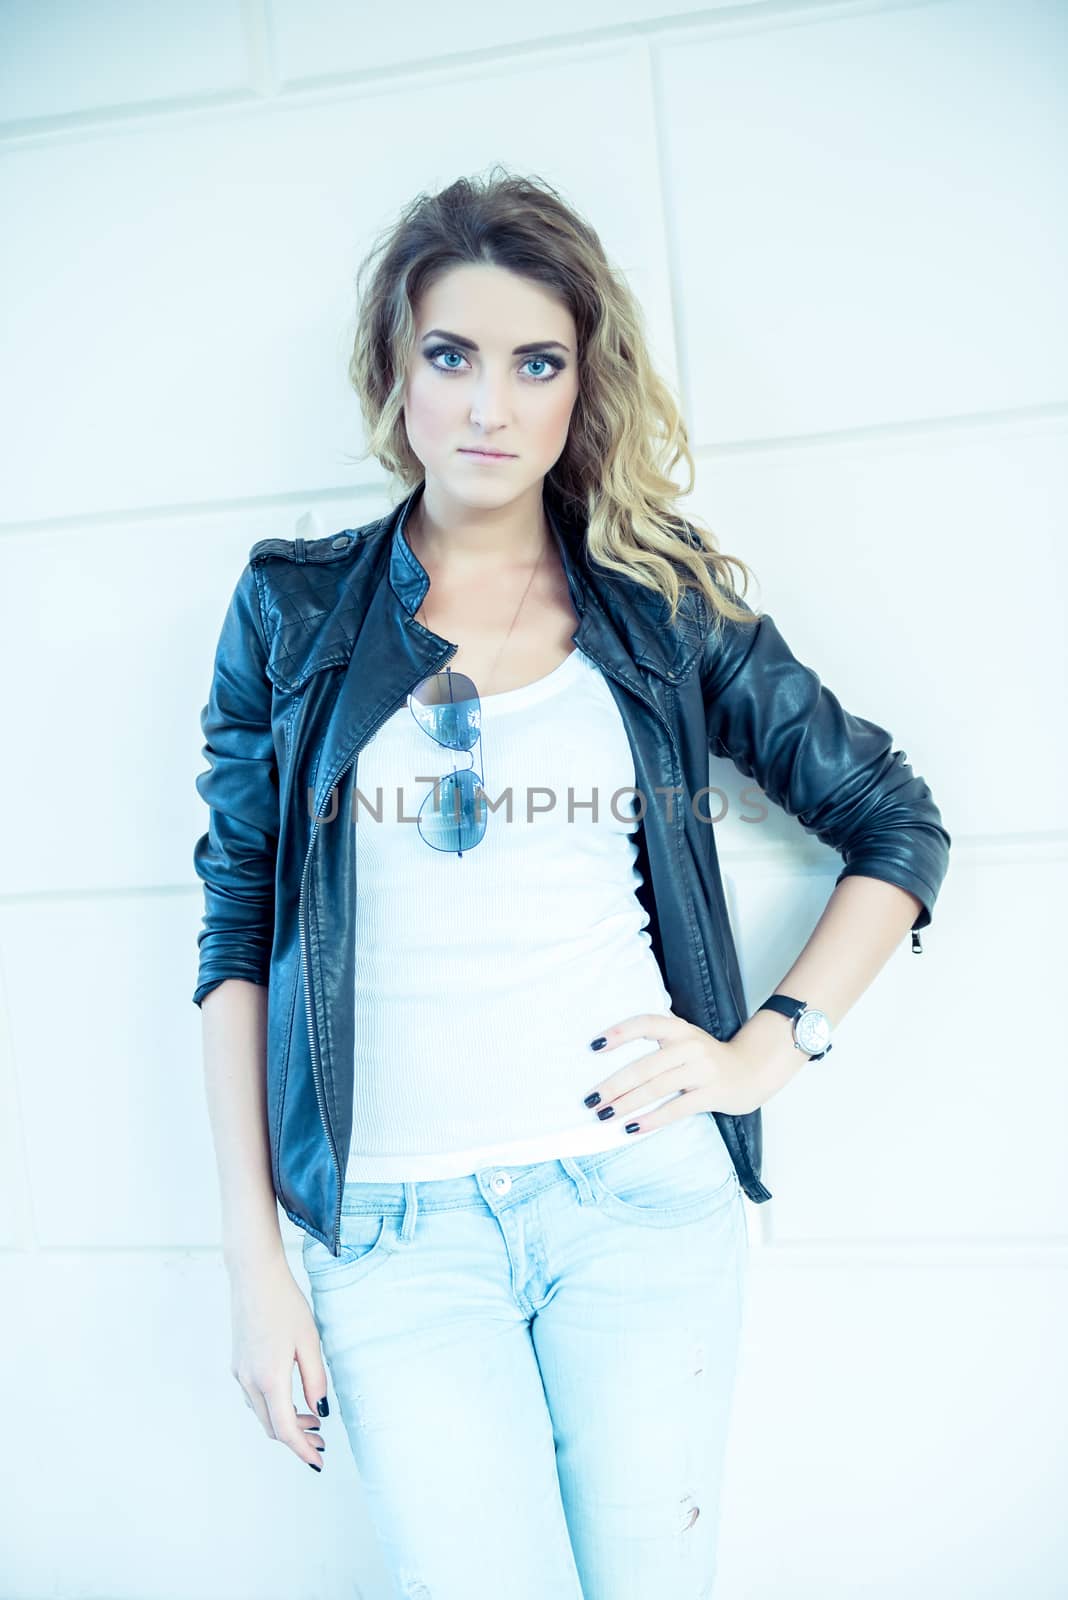 Hipster beautiful girl in leather jacket and jeans. Fashion girl posing with leather jacket